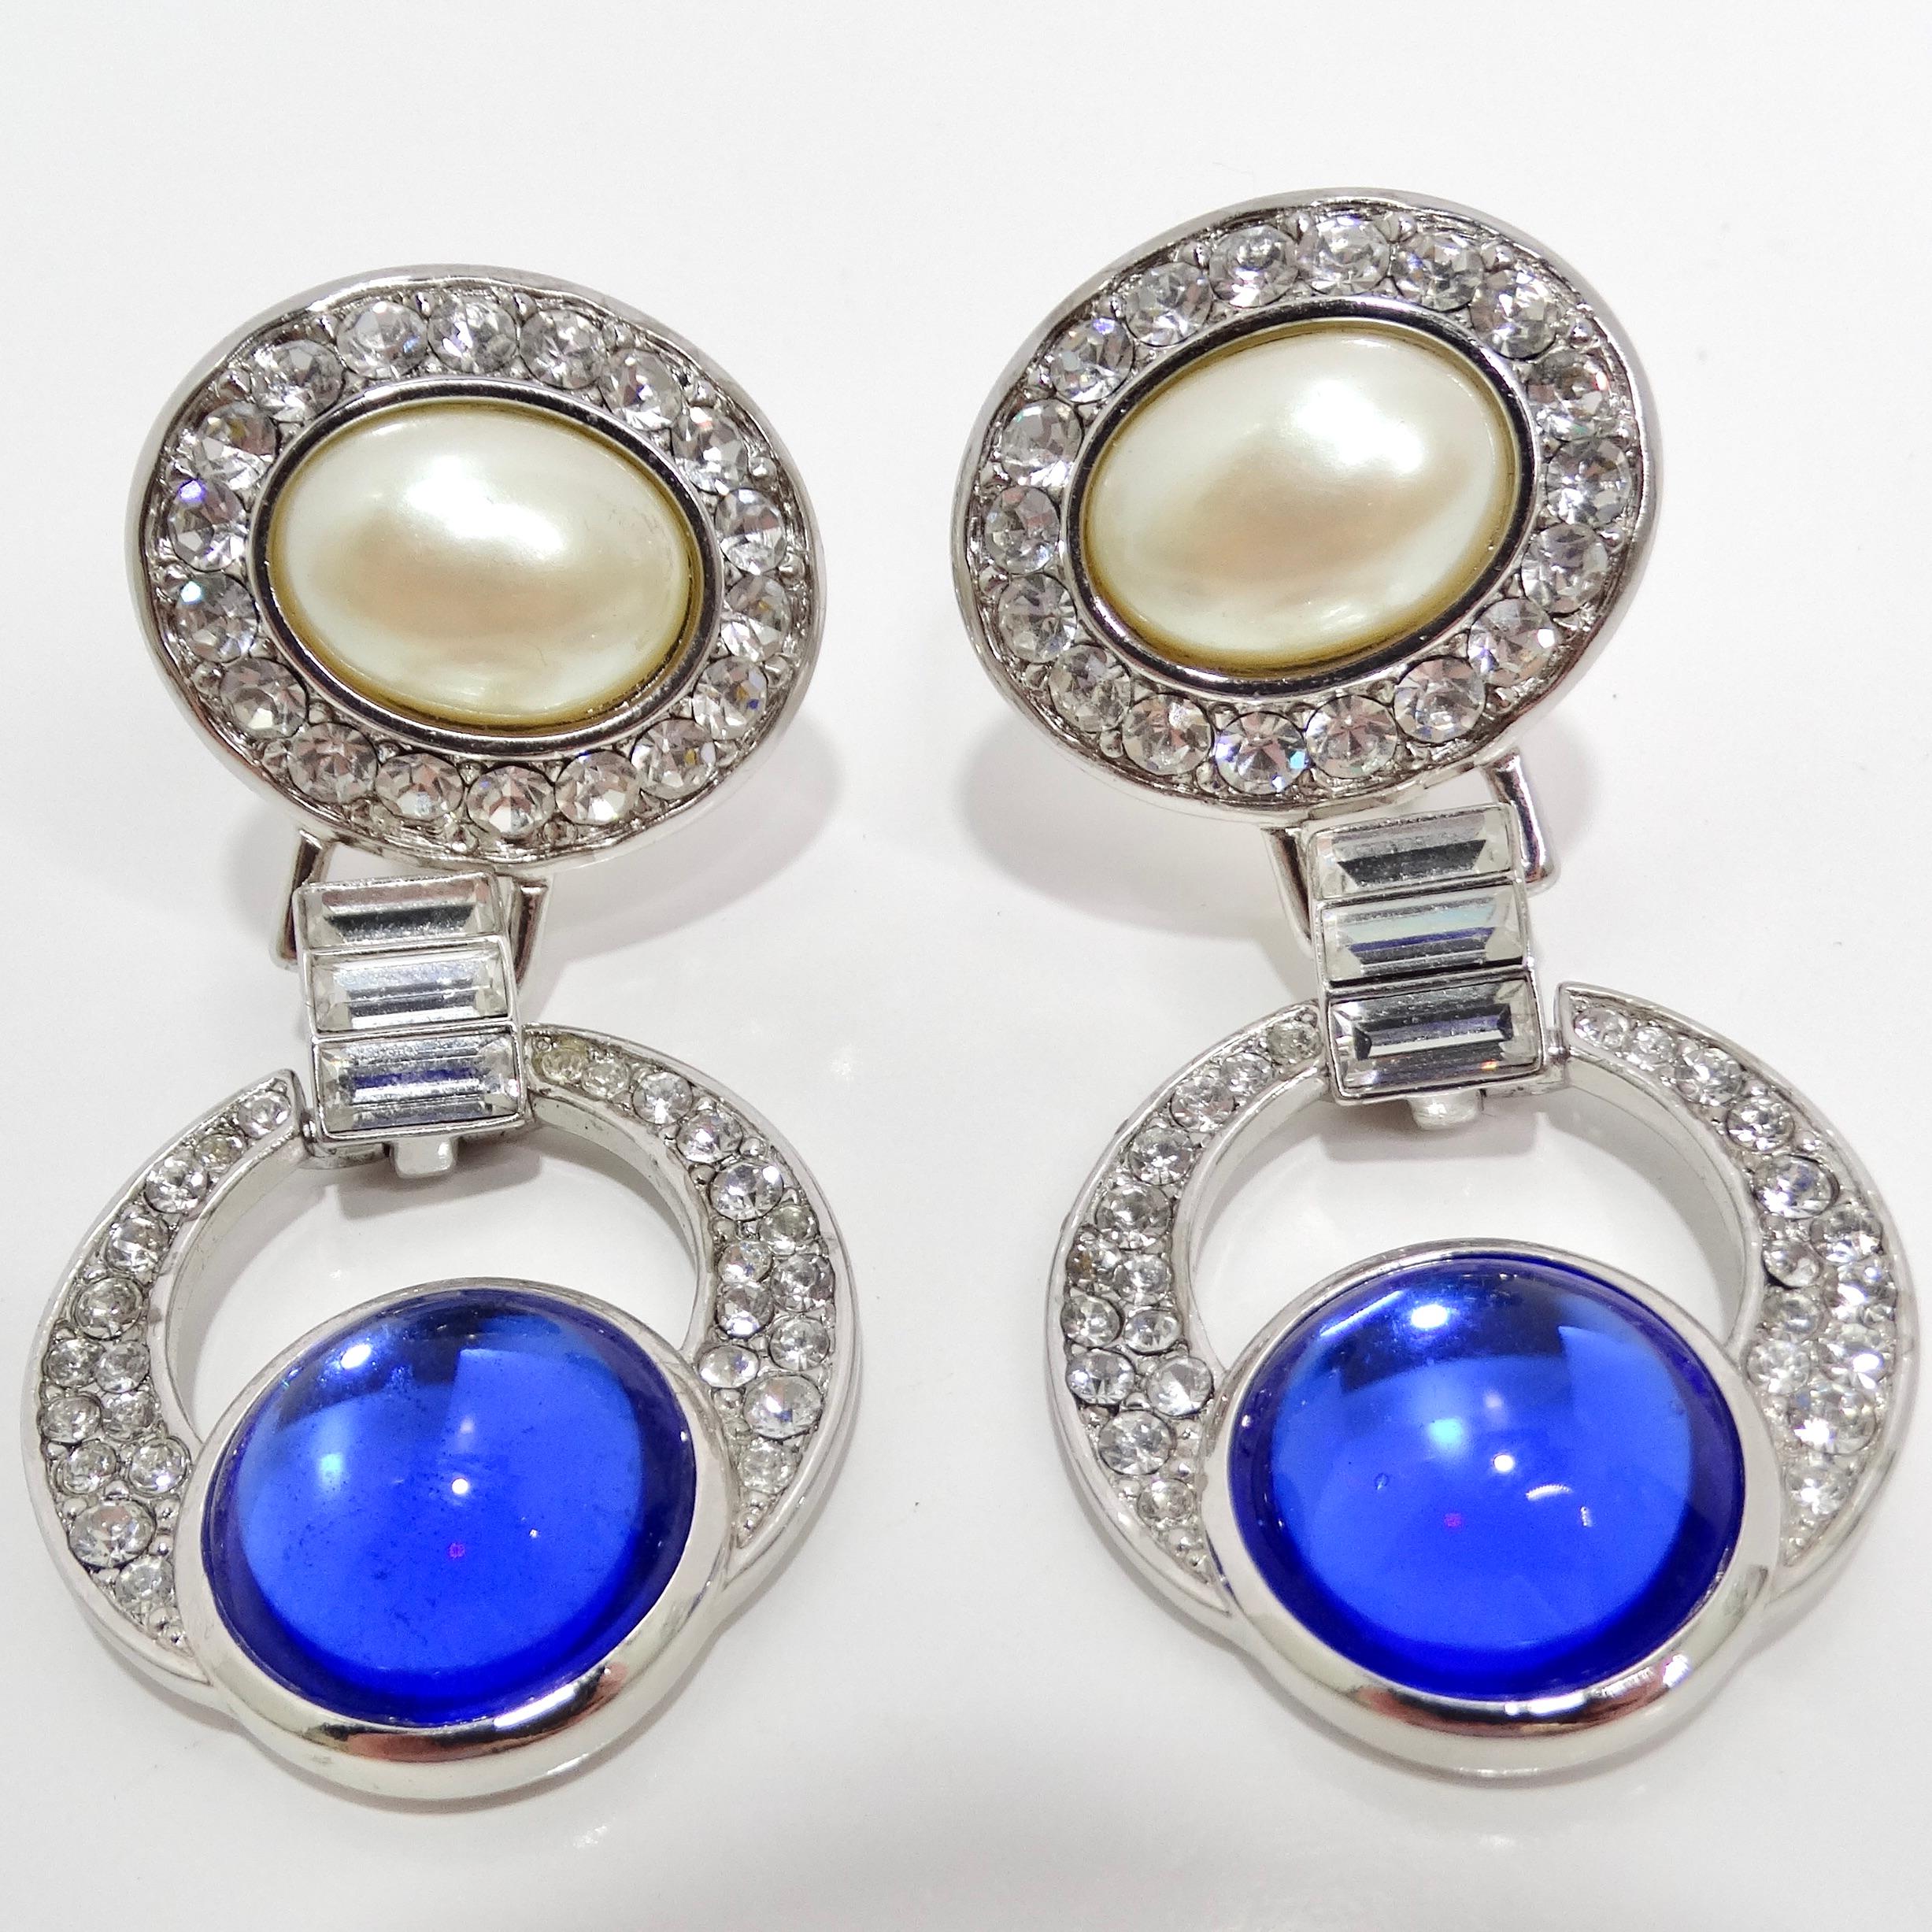 Introducing the Yves Saint Laurent 1990s Faux Sapphire Pearl Dangle Earrings, a glamorous and captivating design that embodies the opulence and sophistication of the era. These exquisite earrings boast a multi-dimensional aesthetic, featuring two